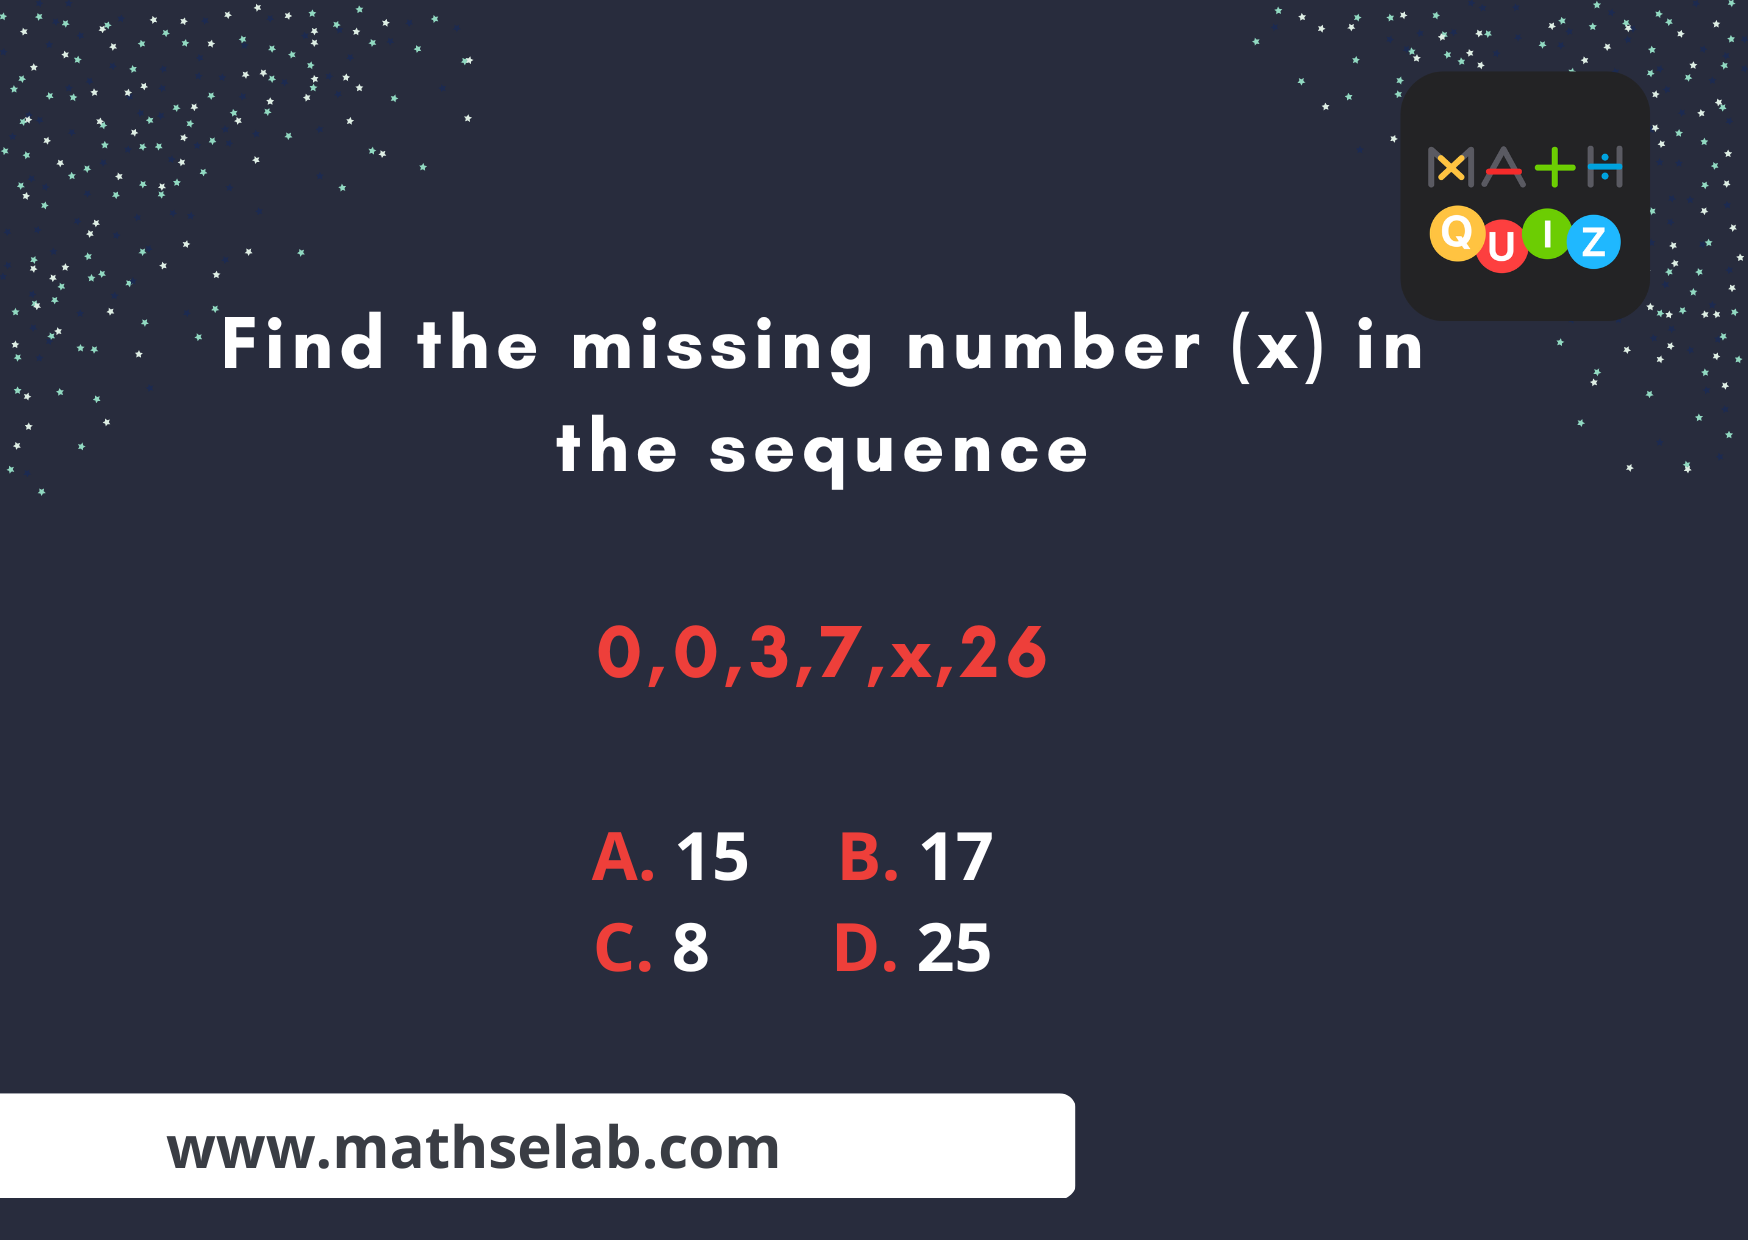 Find the missing number (x) in the sequence 0,0,3,7,x,26